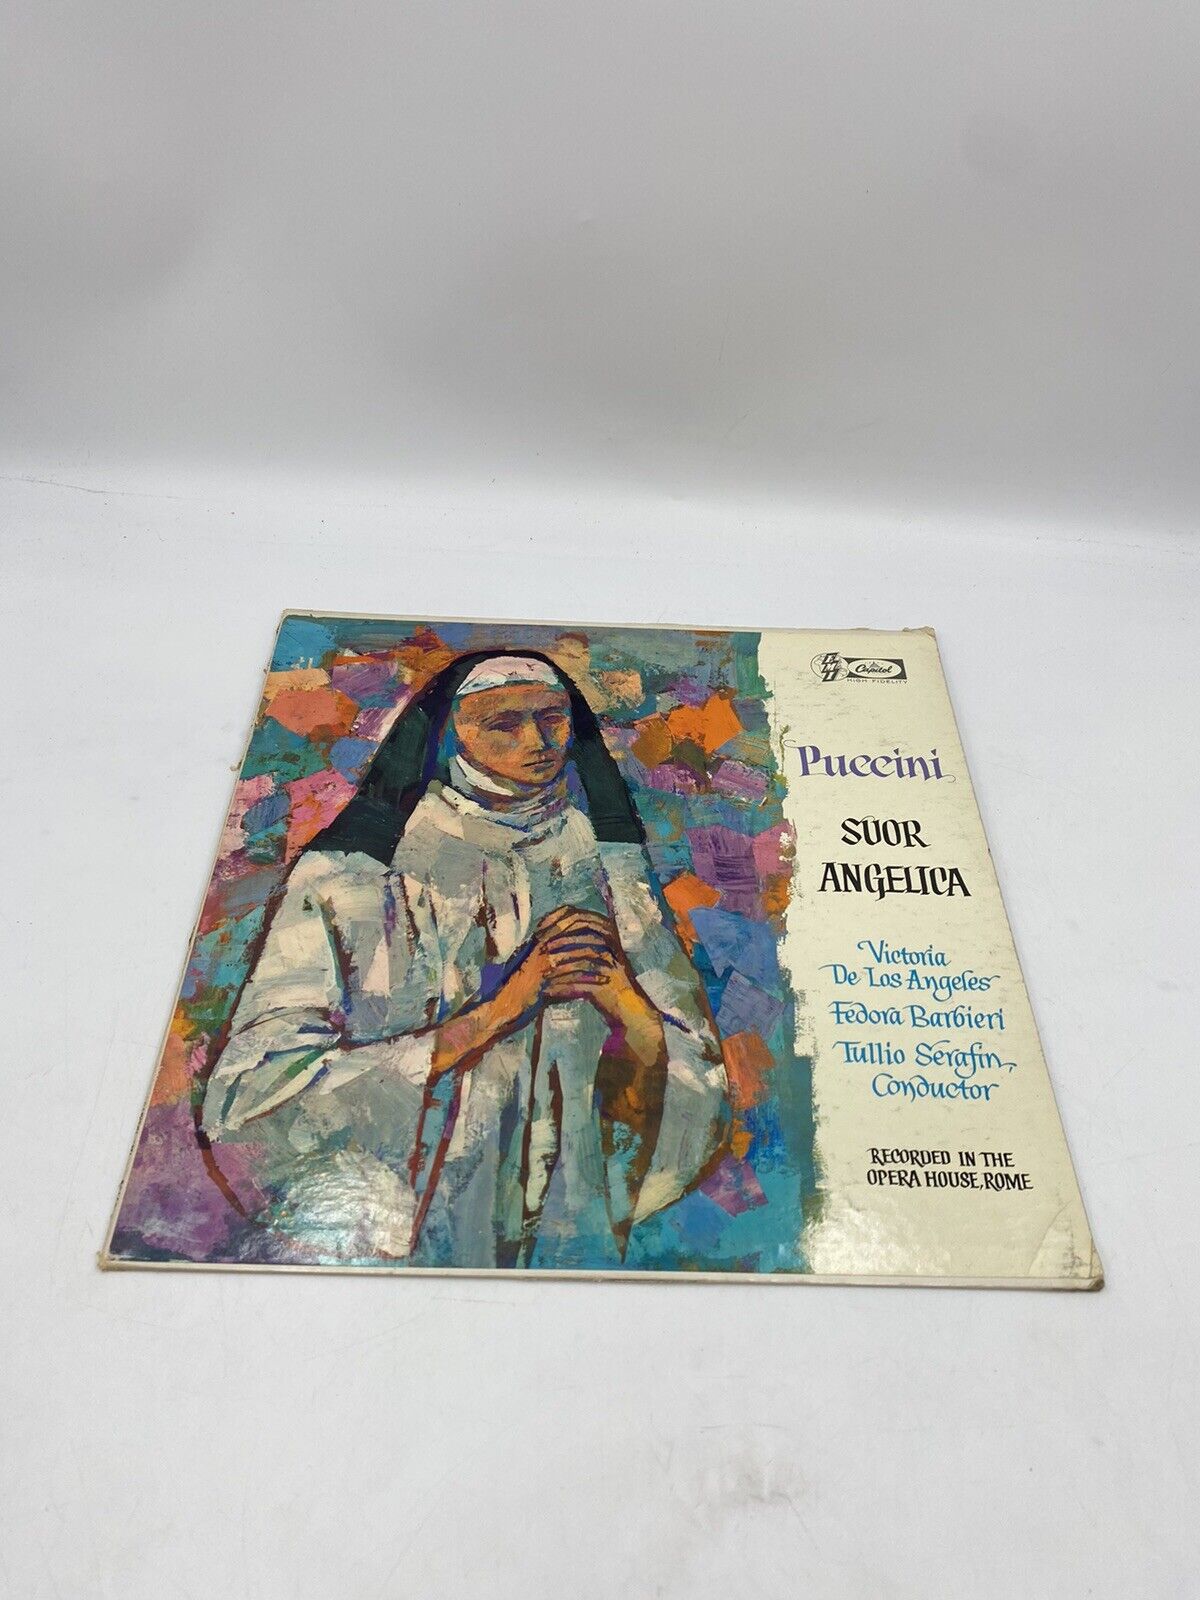 Puccini Suor Angelica Beginning (Vinyl LP, 12”) - Recorded In Opera House Rome